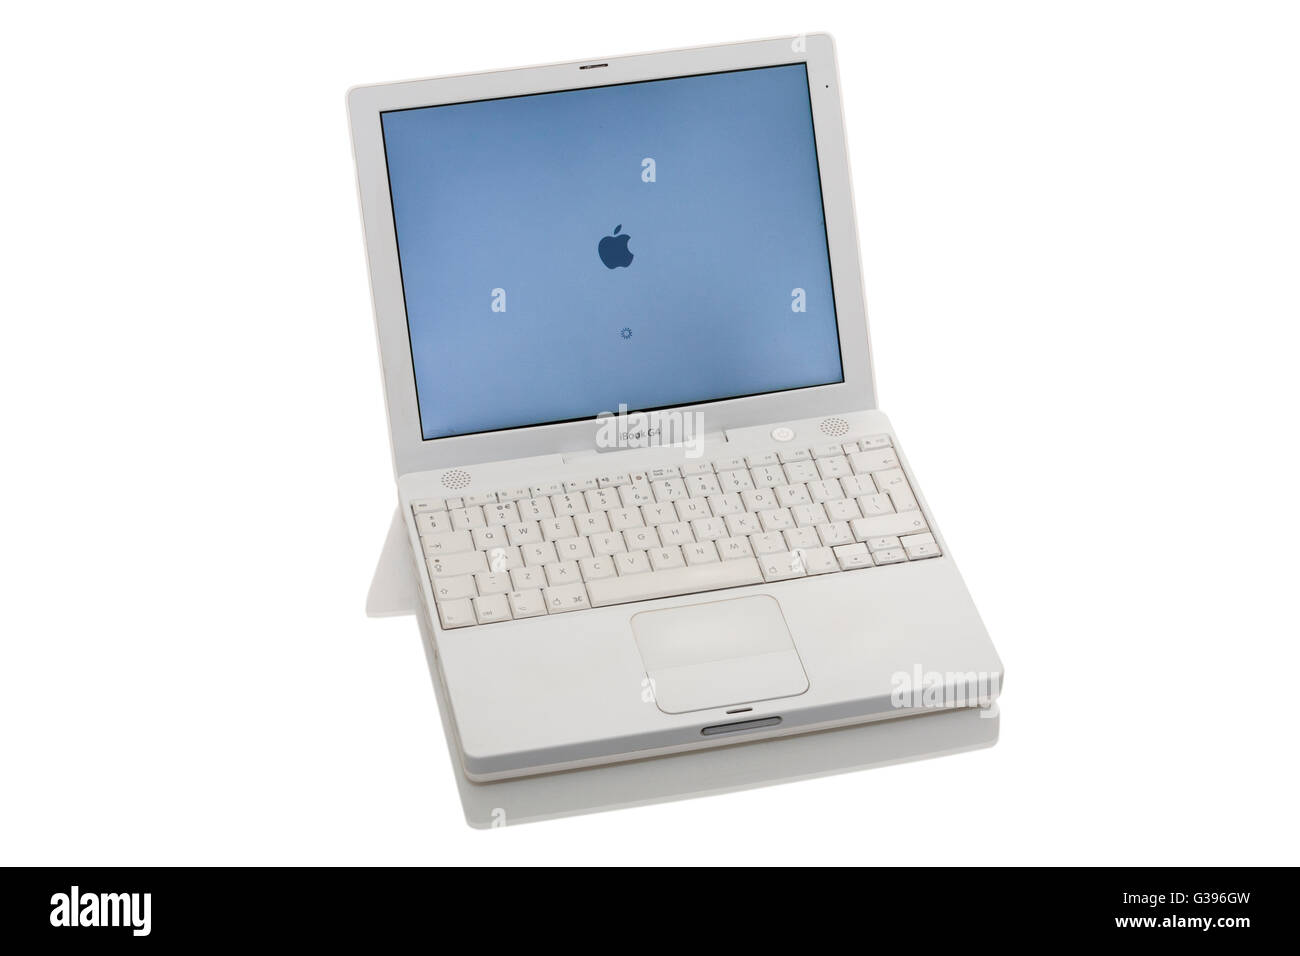 Apple iBook G4 laptop / lap top computer with scrolling TrackPad / trackpad / track pad, start / starting up screen & keyboard. Stock Photo